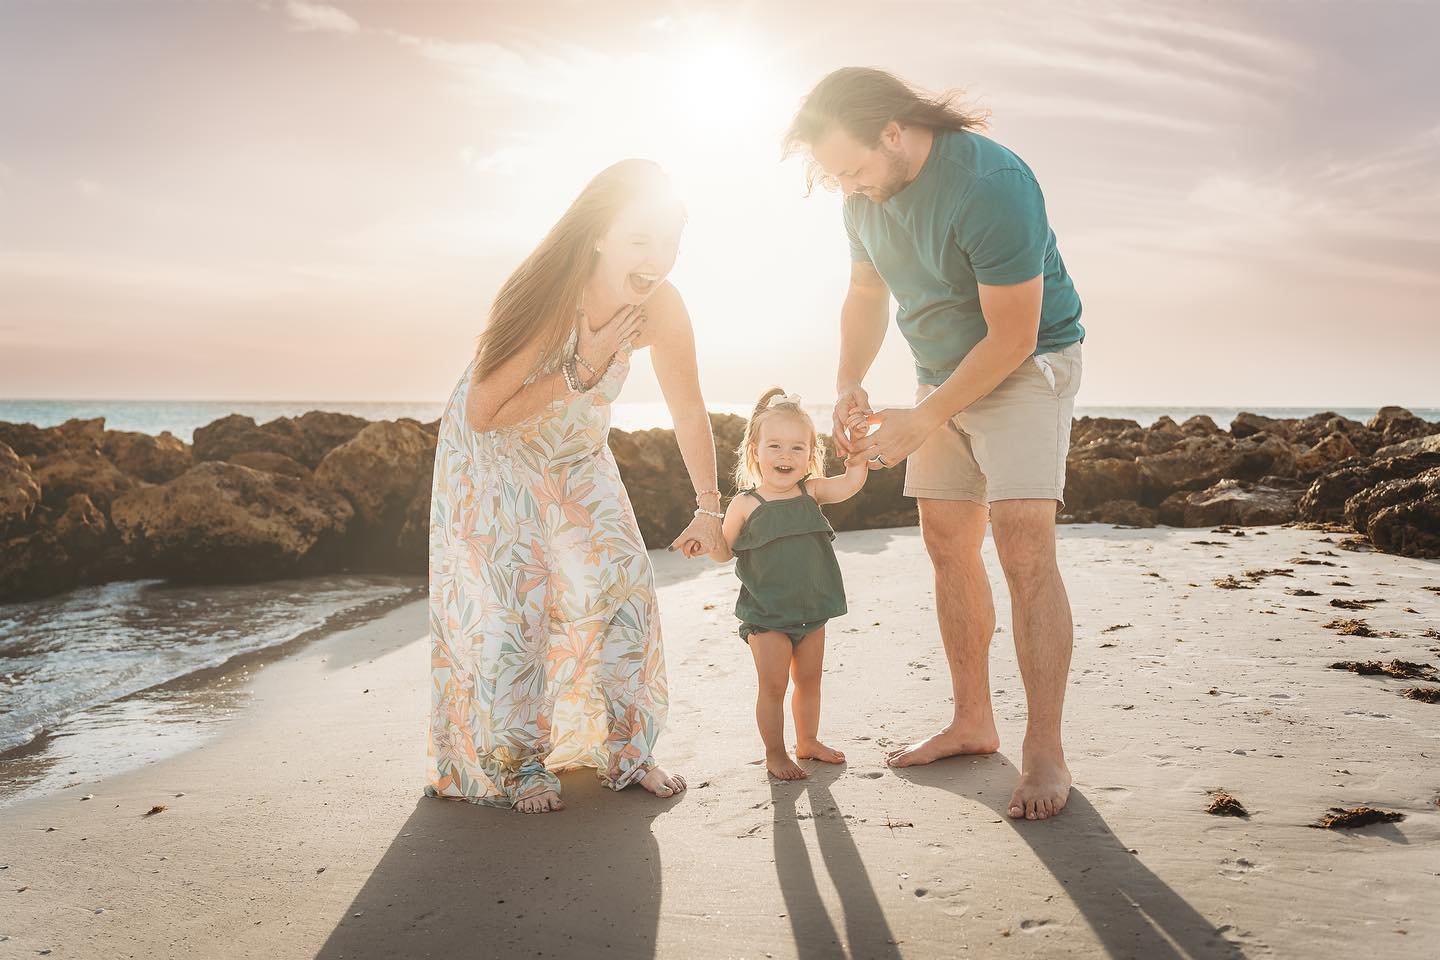 Capturing cherished moments by the sea, where moms shine as the true superheroes they are. 🌊💫 From laughter-filled beach walks to tender hugs under the sun, these snapshots reflect the beauty of motherhood in its purest form. 📸✨ #BeachFamilyPhotos